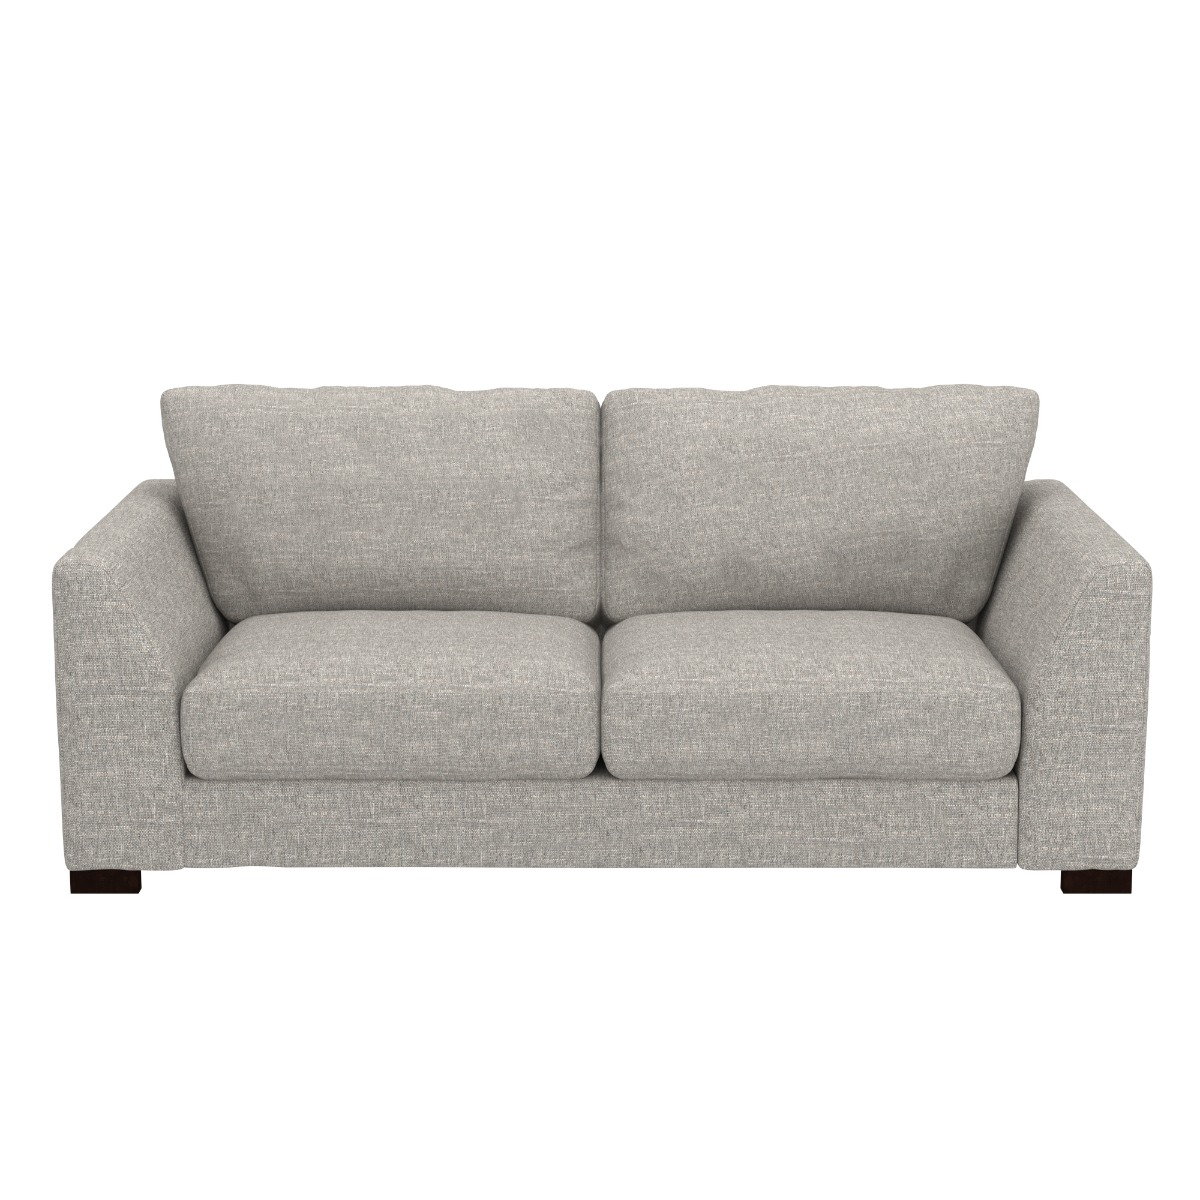 Photo of Langford 2 seater sofa without scatters in grey fabric